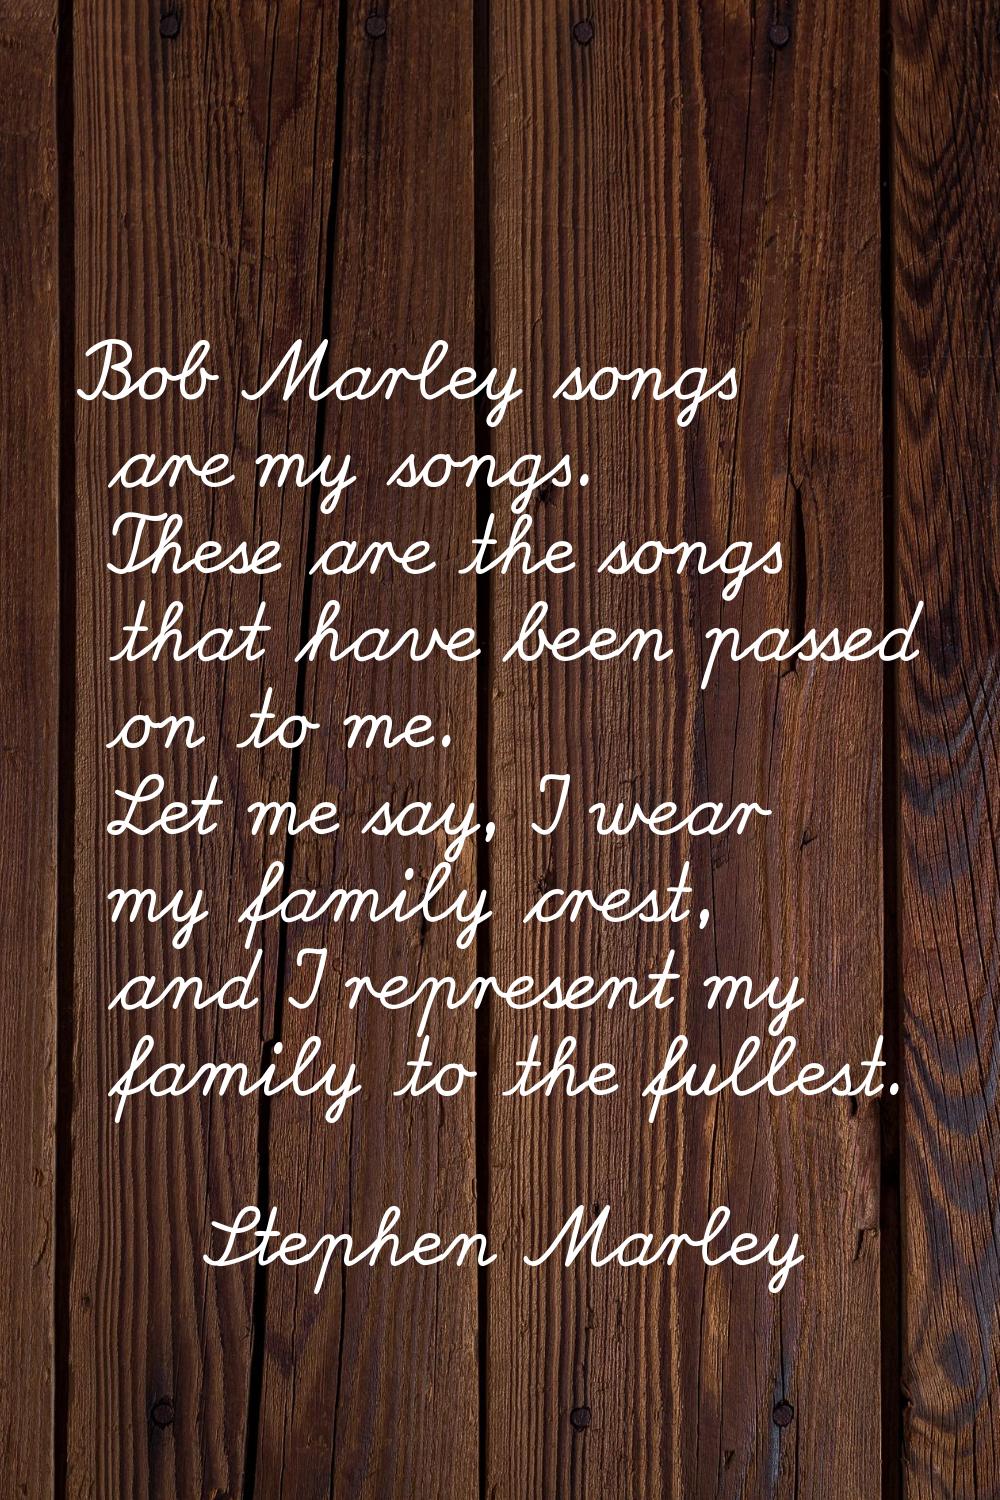 Bob Marley songs are my songs. These are the songs that have been passed on to me. Let me say, I we